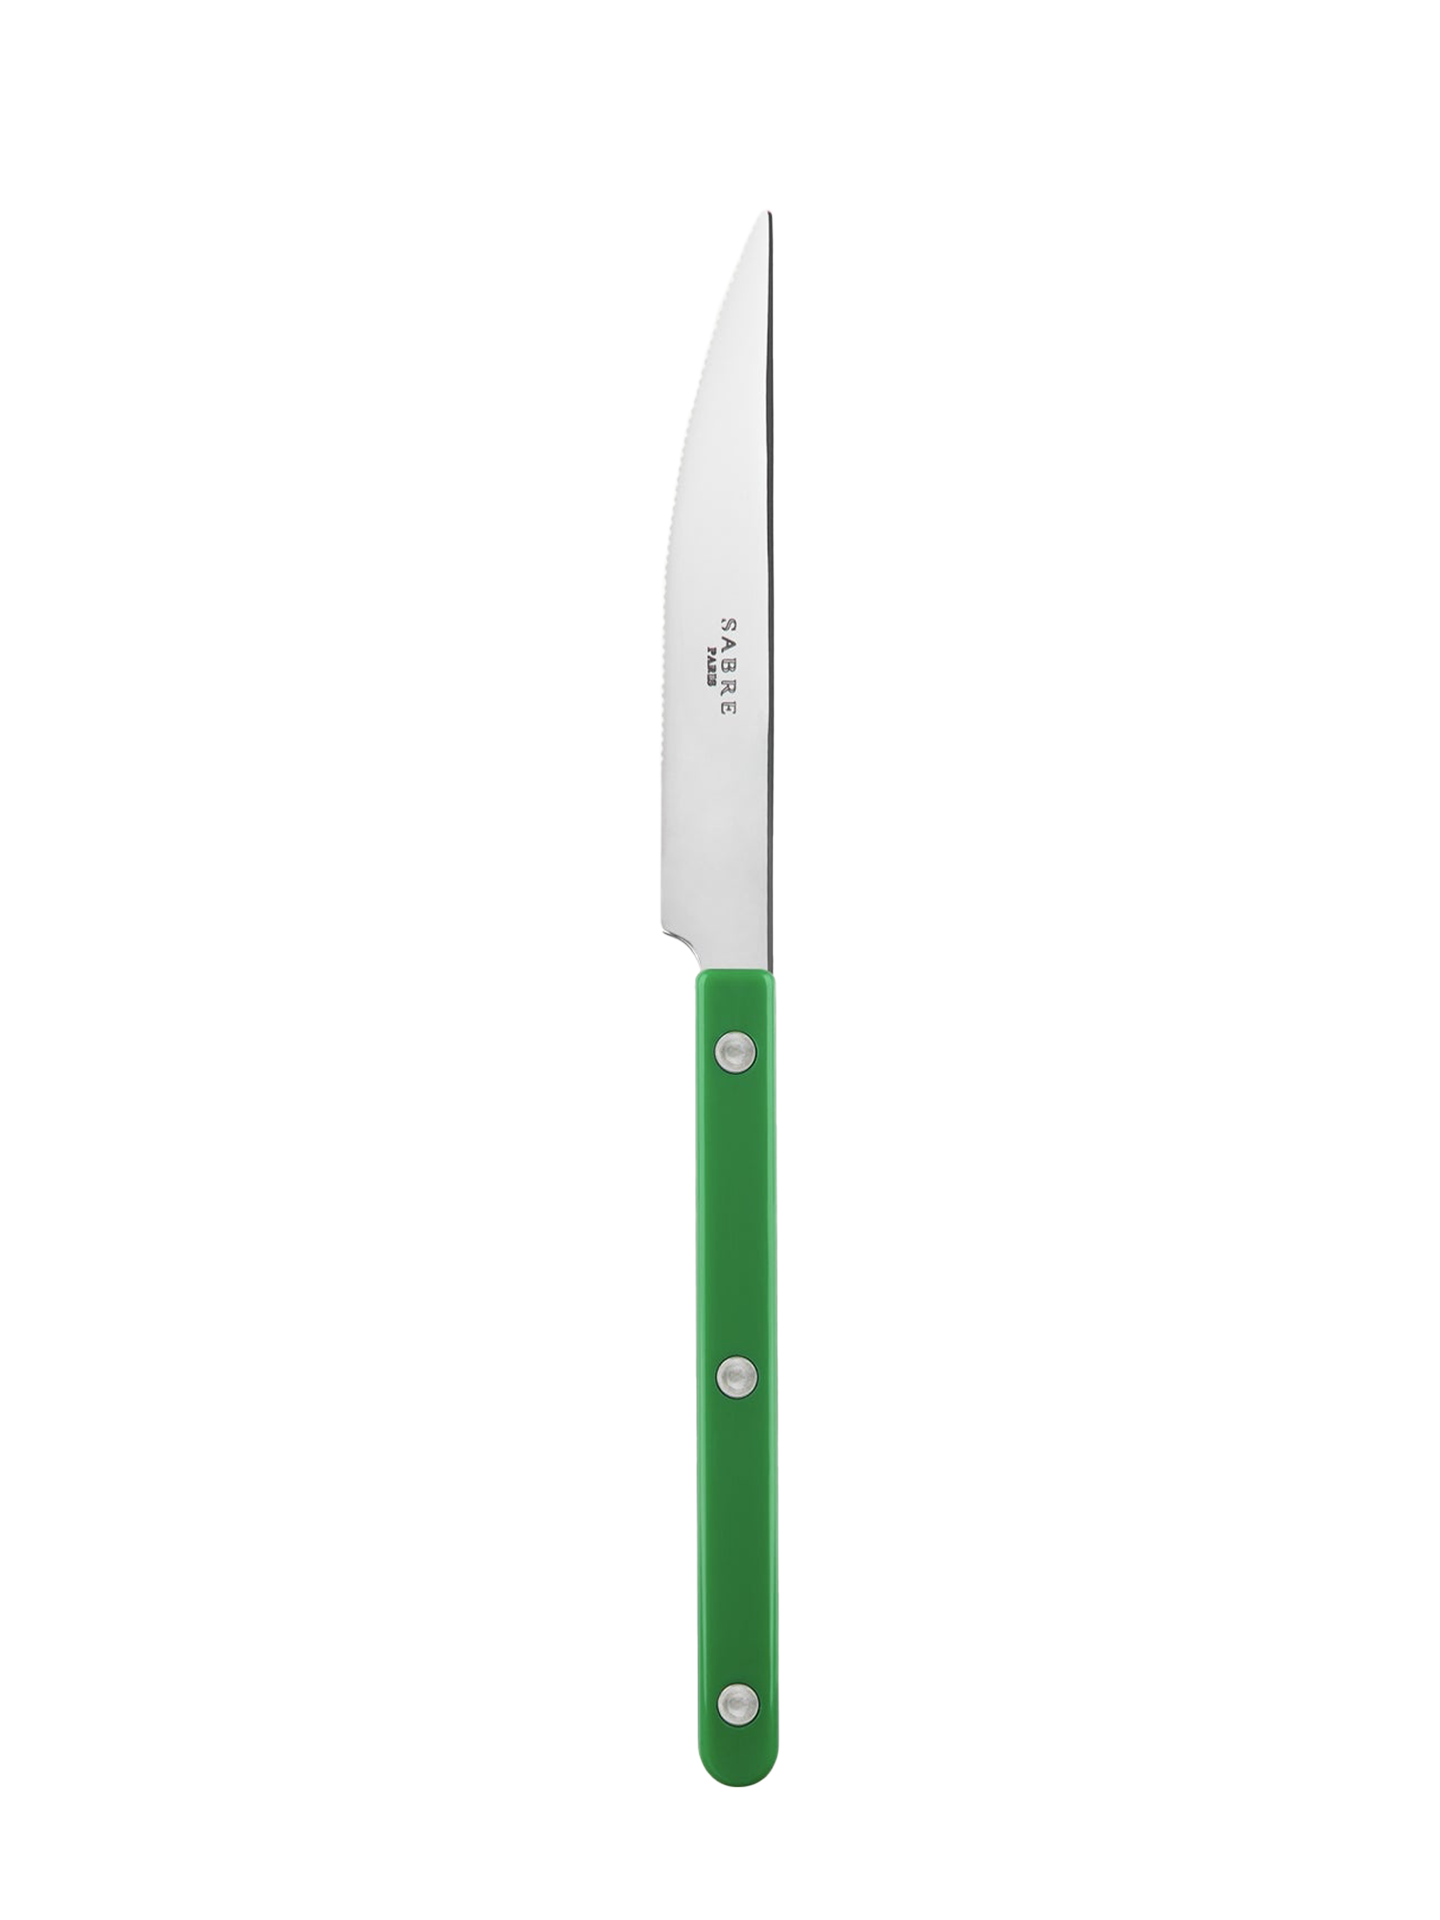 The Bistrot garden green dinner knife by Sabre Paris is a fresh combo of new design and the tradition of the rich Parisian bistro and cafe culture.